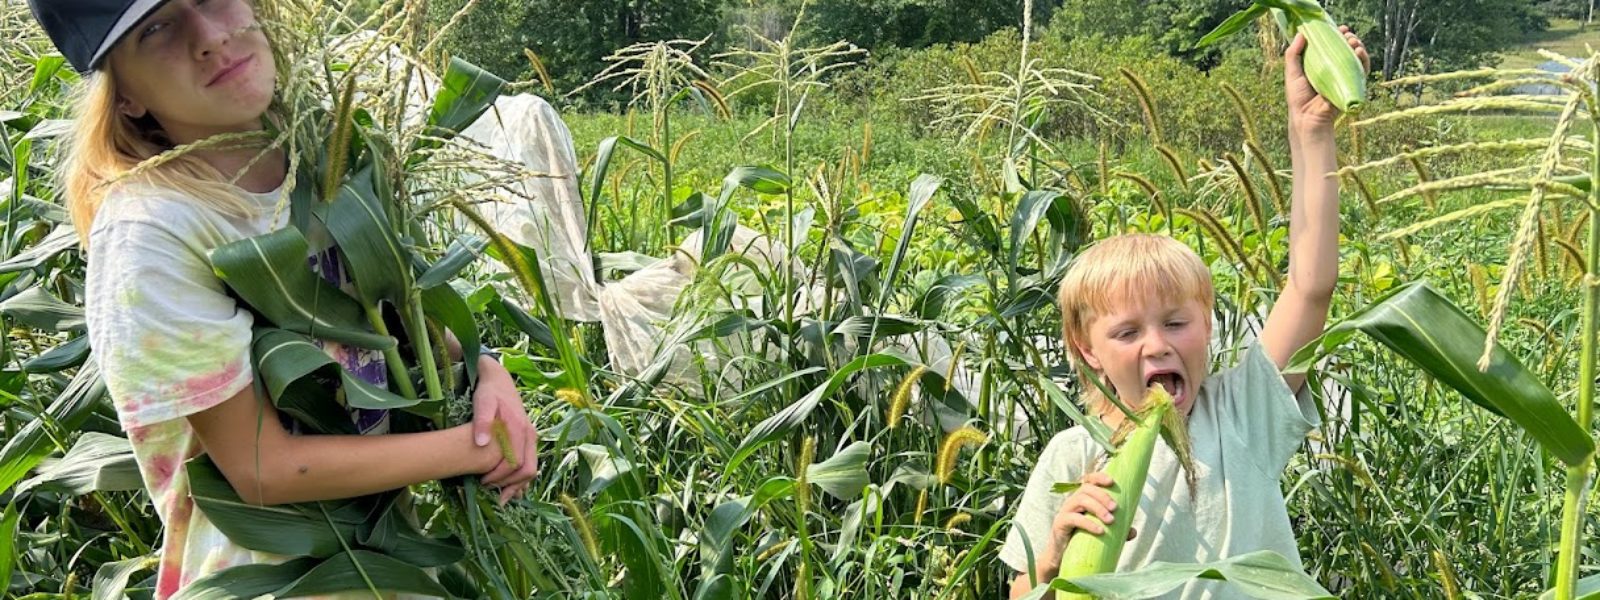 Two kids in a corn field acting silly